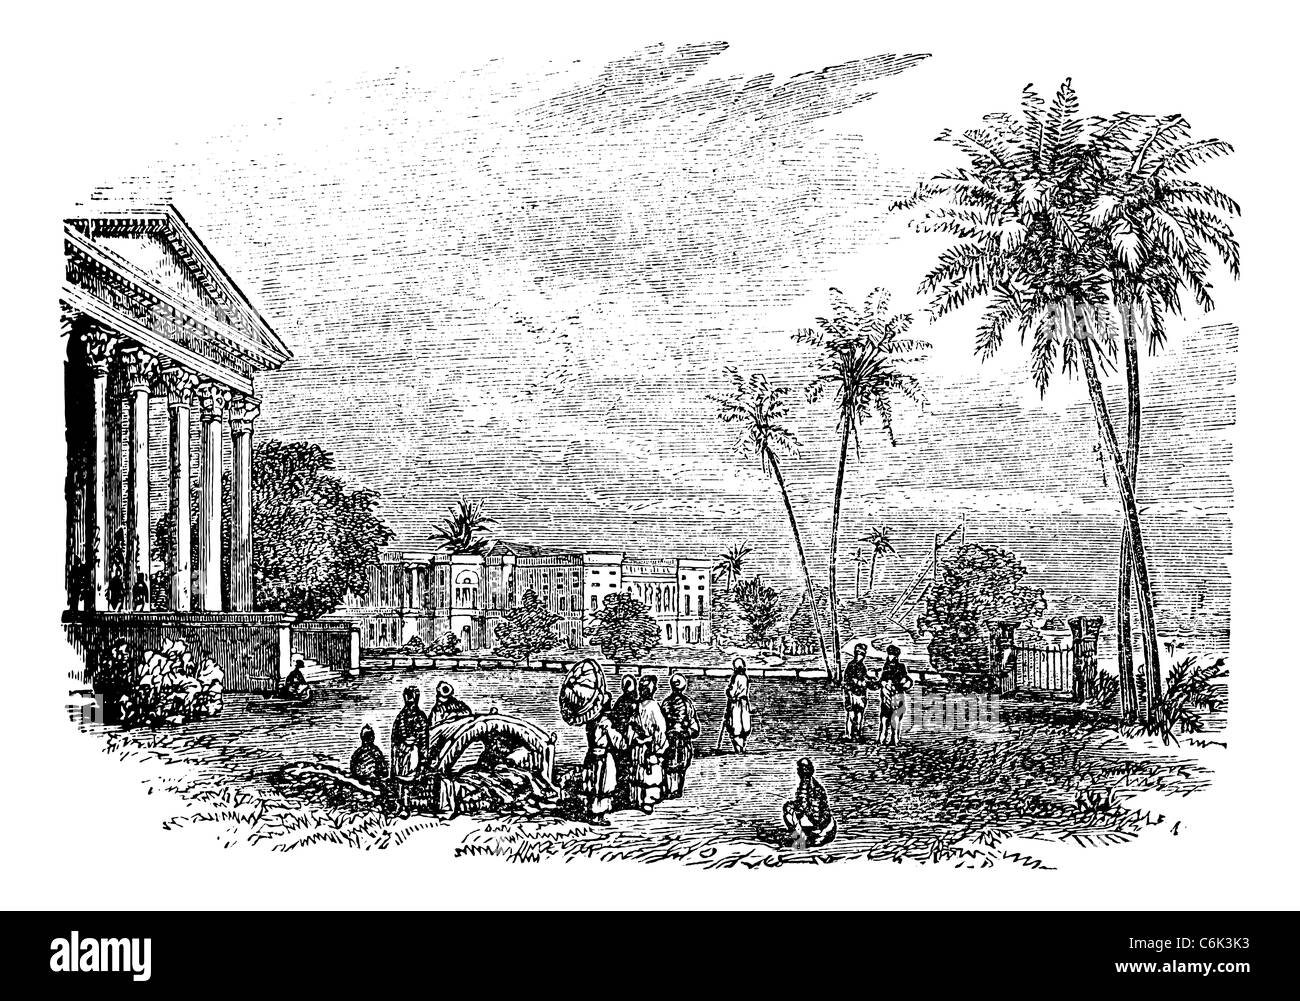 Barrackpore or Barrackpur, in West Bengal, India, during the 1890s, vintage engraving. Old engraved illustration of Barrackpore. Stock Photo